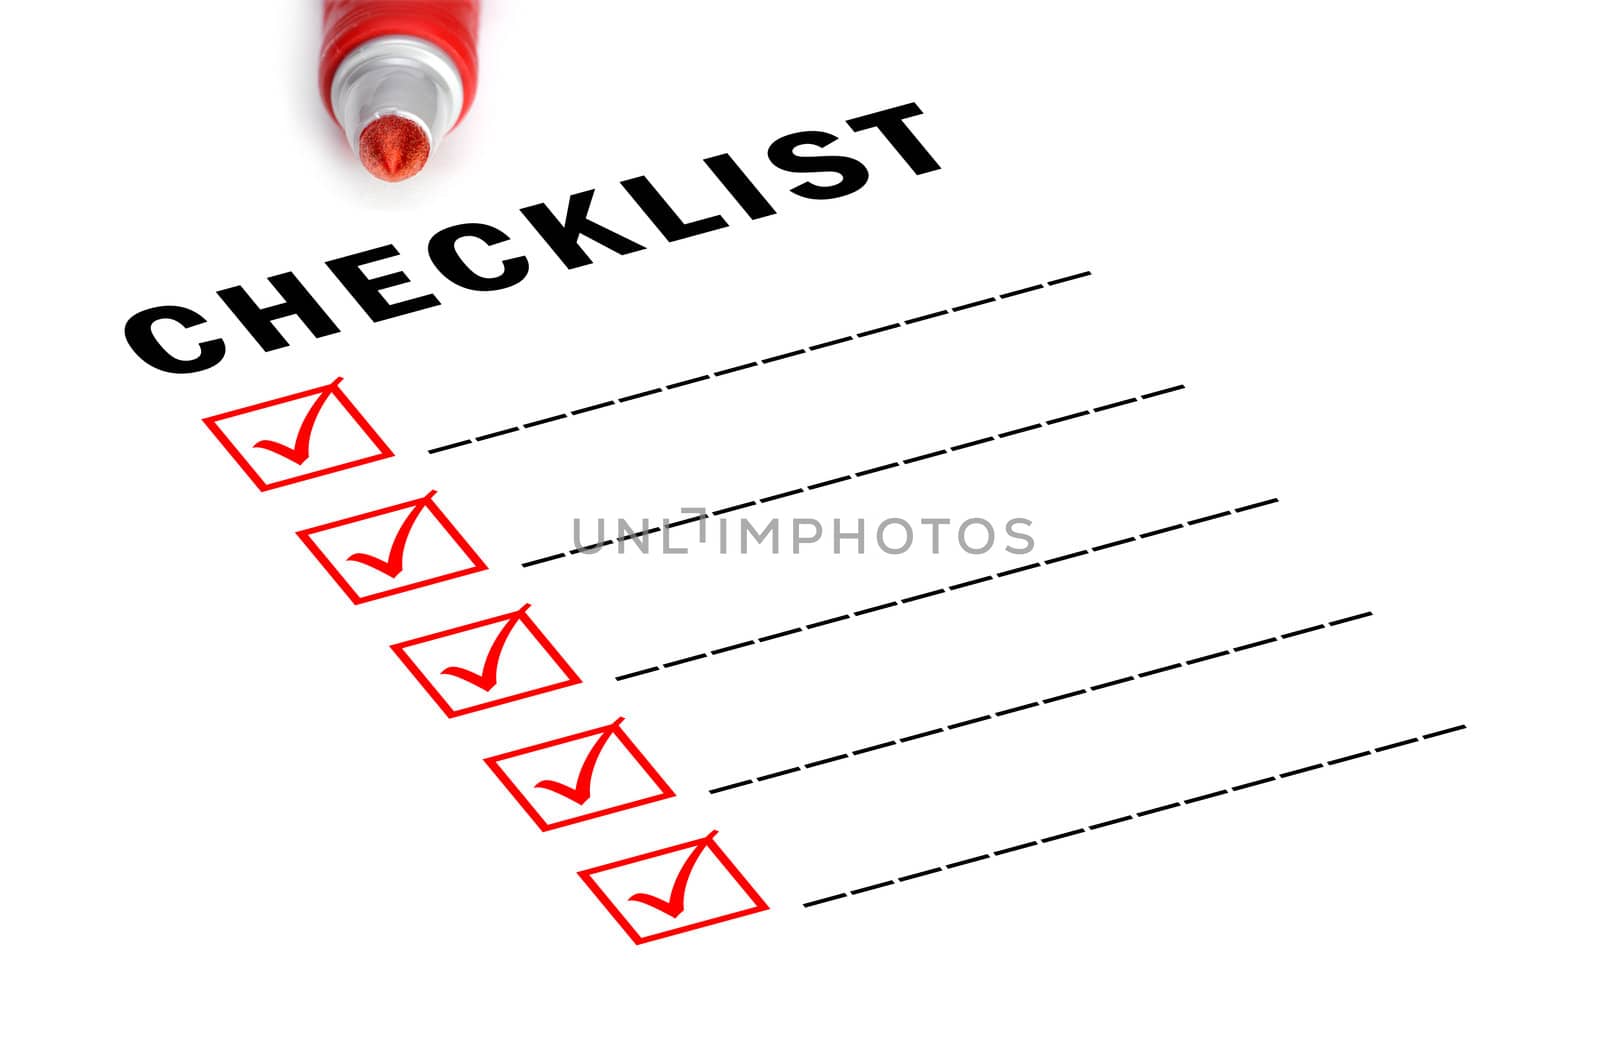 Checklist with red felt marker and checked boxes. 